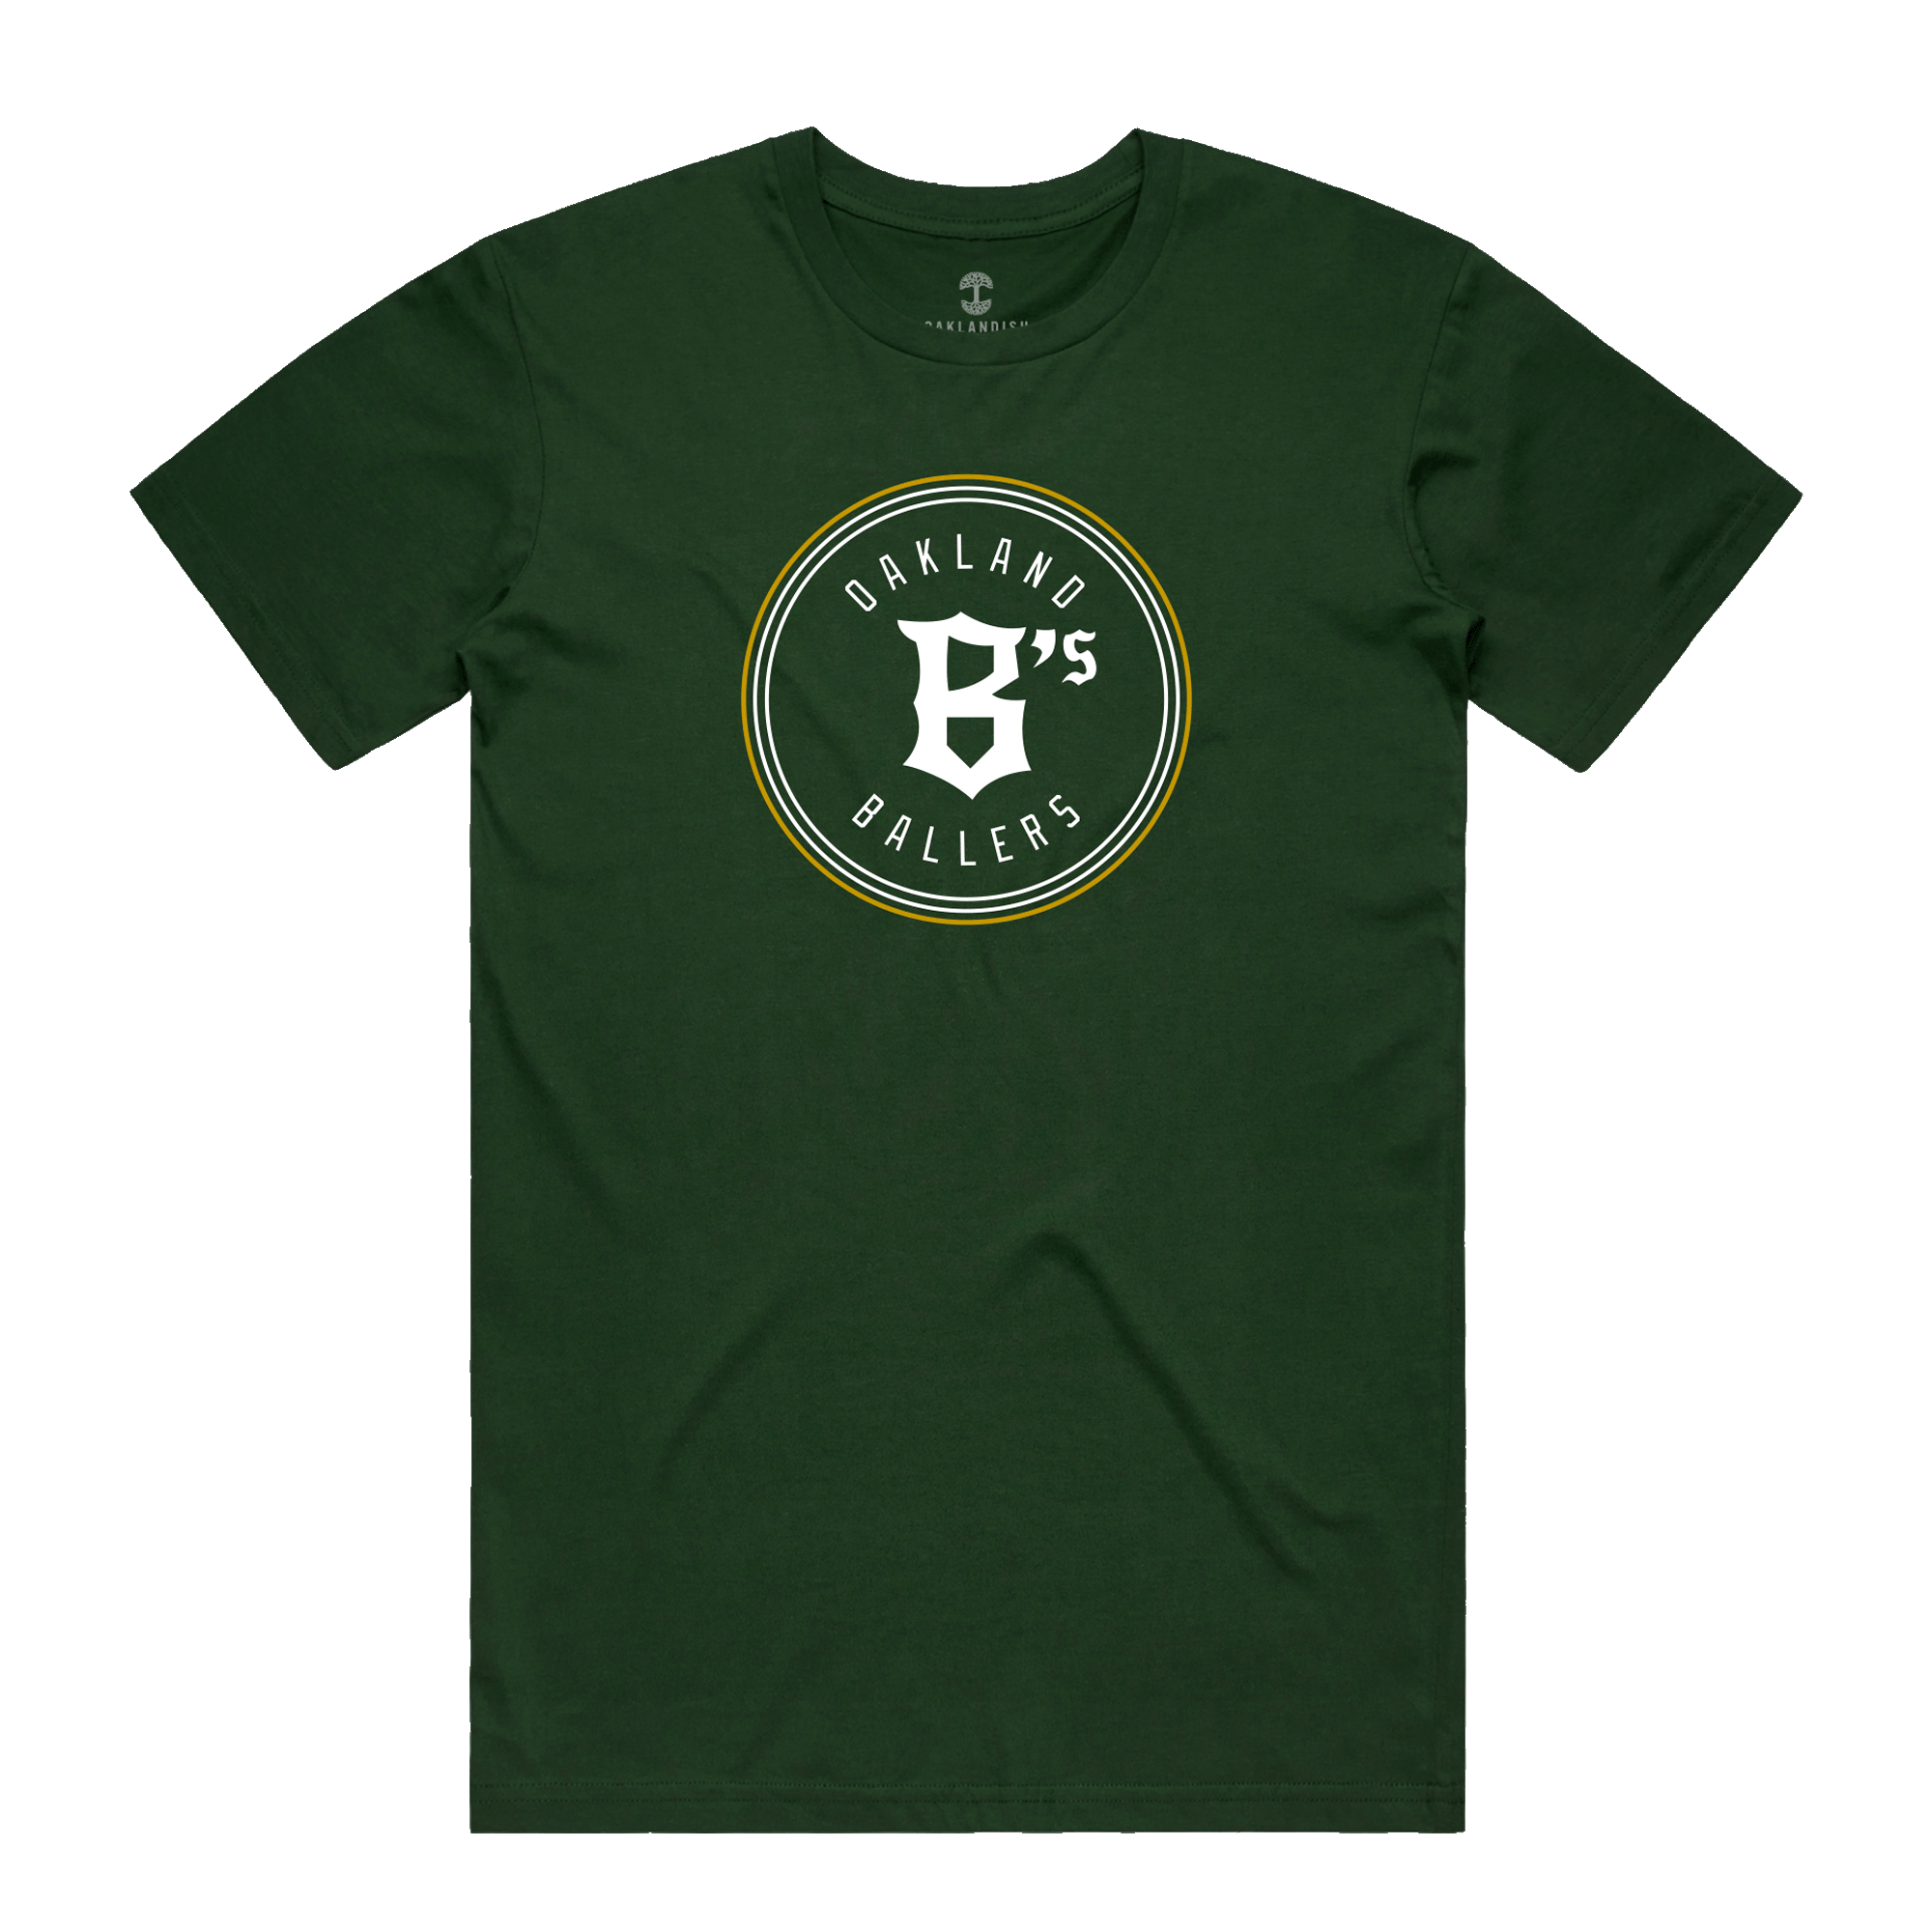 Front view of forest green t-shirt with Oakland B's Ballers classic white and gold logo on the chest.